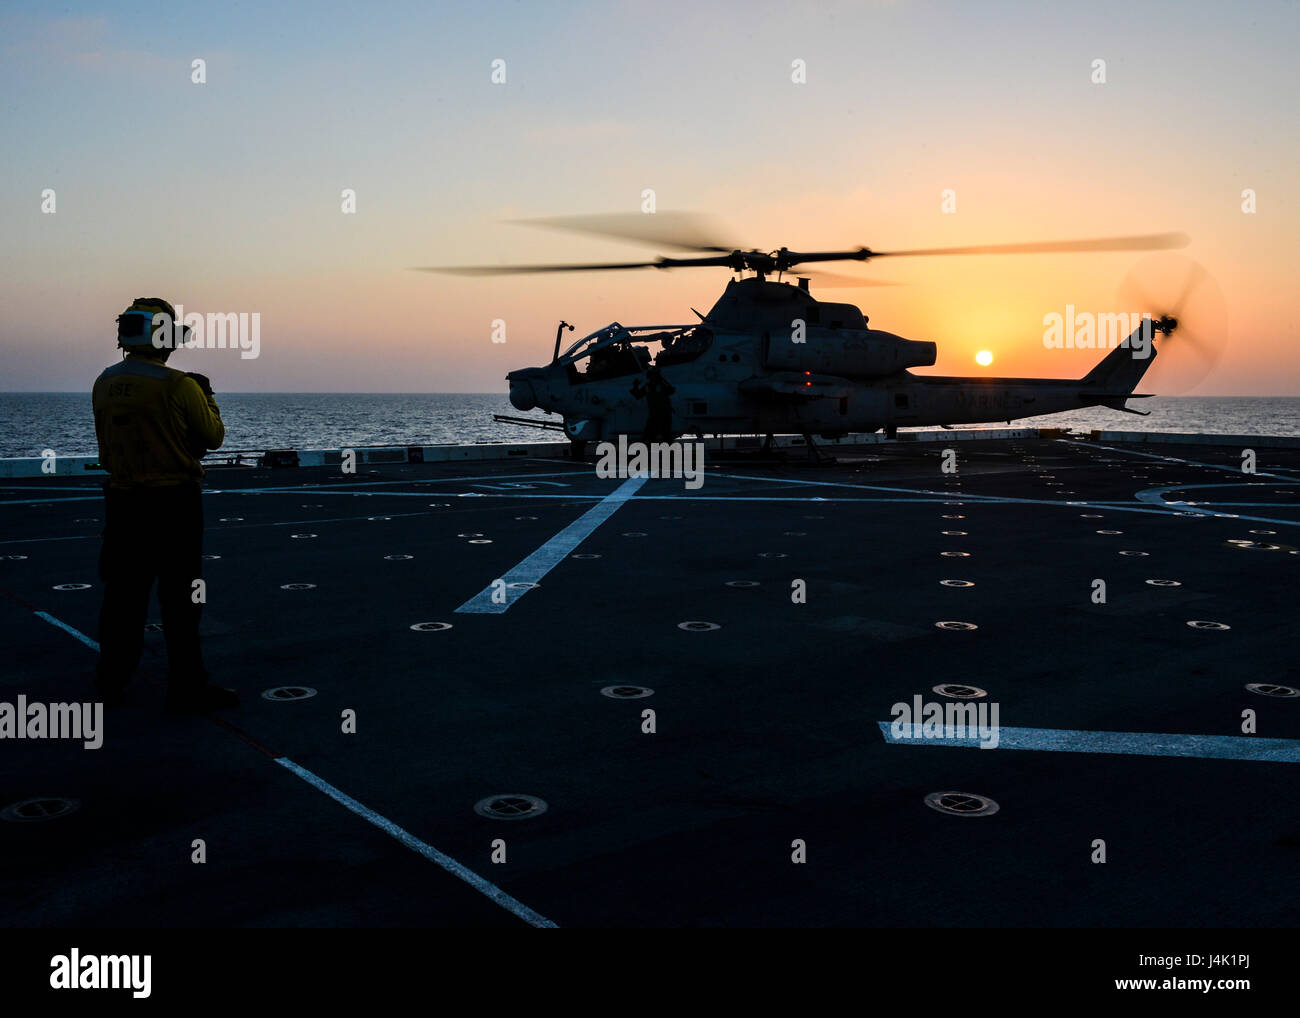 161213-N-LR795-114 GULF OF ADEN (Dec. 13, 2016) An AH-1 Cobra prepares to launch off the flight deck of the amphibious transport dock ship USS Somerset (LPD 25) during Exercise Alligator Dagger. The unilateral exercise is designed to provide an opportunity for the Makin Island Amphibious Ready Group (ARG) and 11th Marine Expeditionary Unit to train in amphibious operations within the U.S. 5th Fleet area of operations. Somerset is deployed as part of the Makin Island (ARG) to the U.S. 5th Fleet area of operations to support maritime security operations and theater security cooperation efforts ( Stock Photo